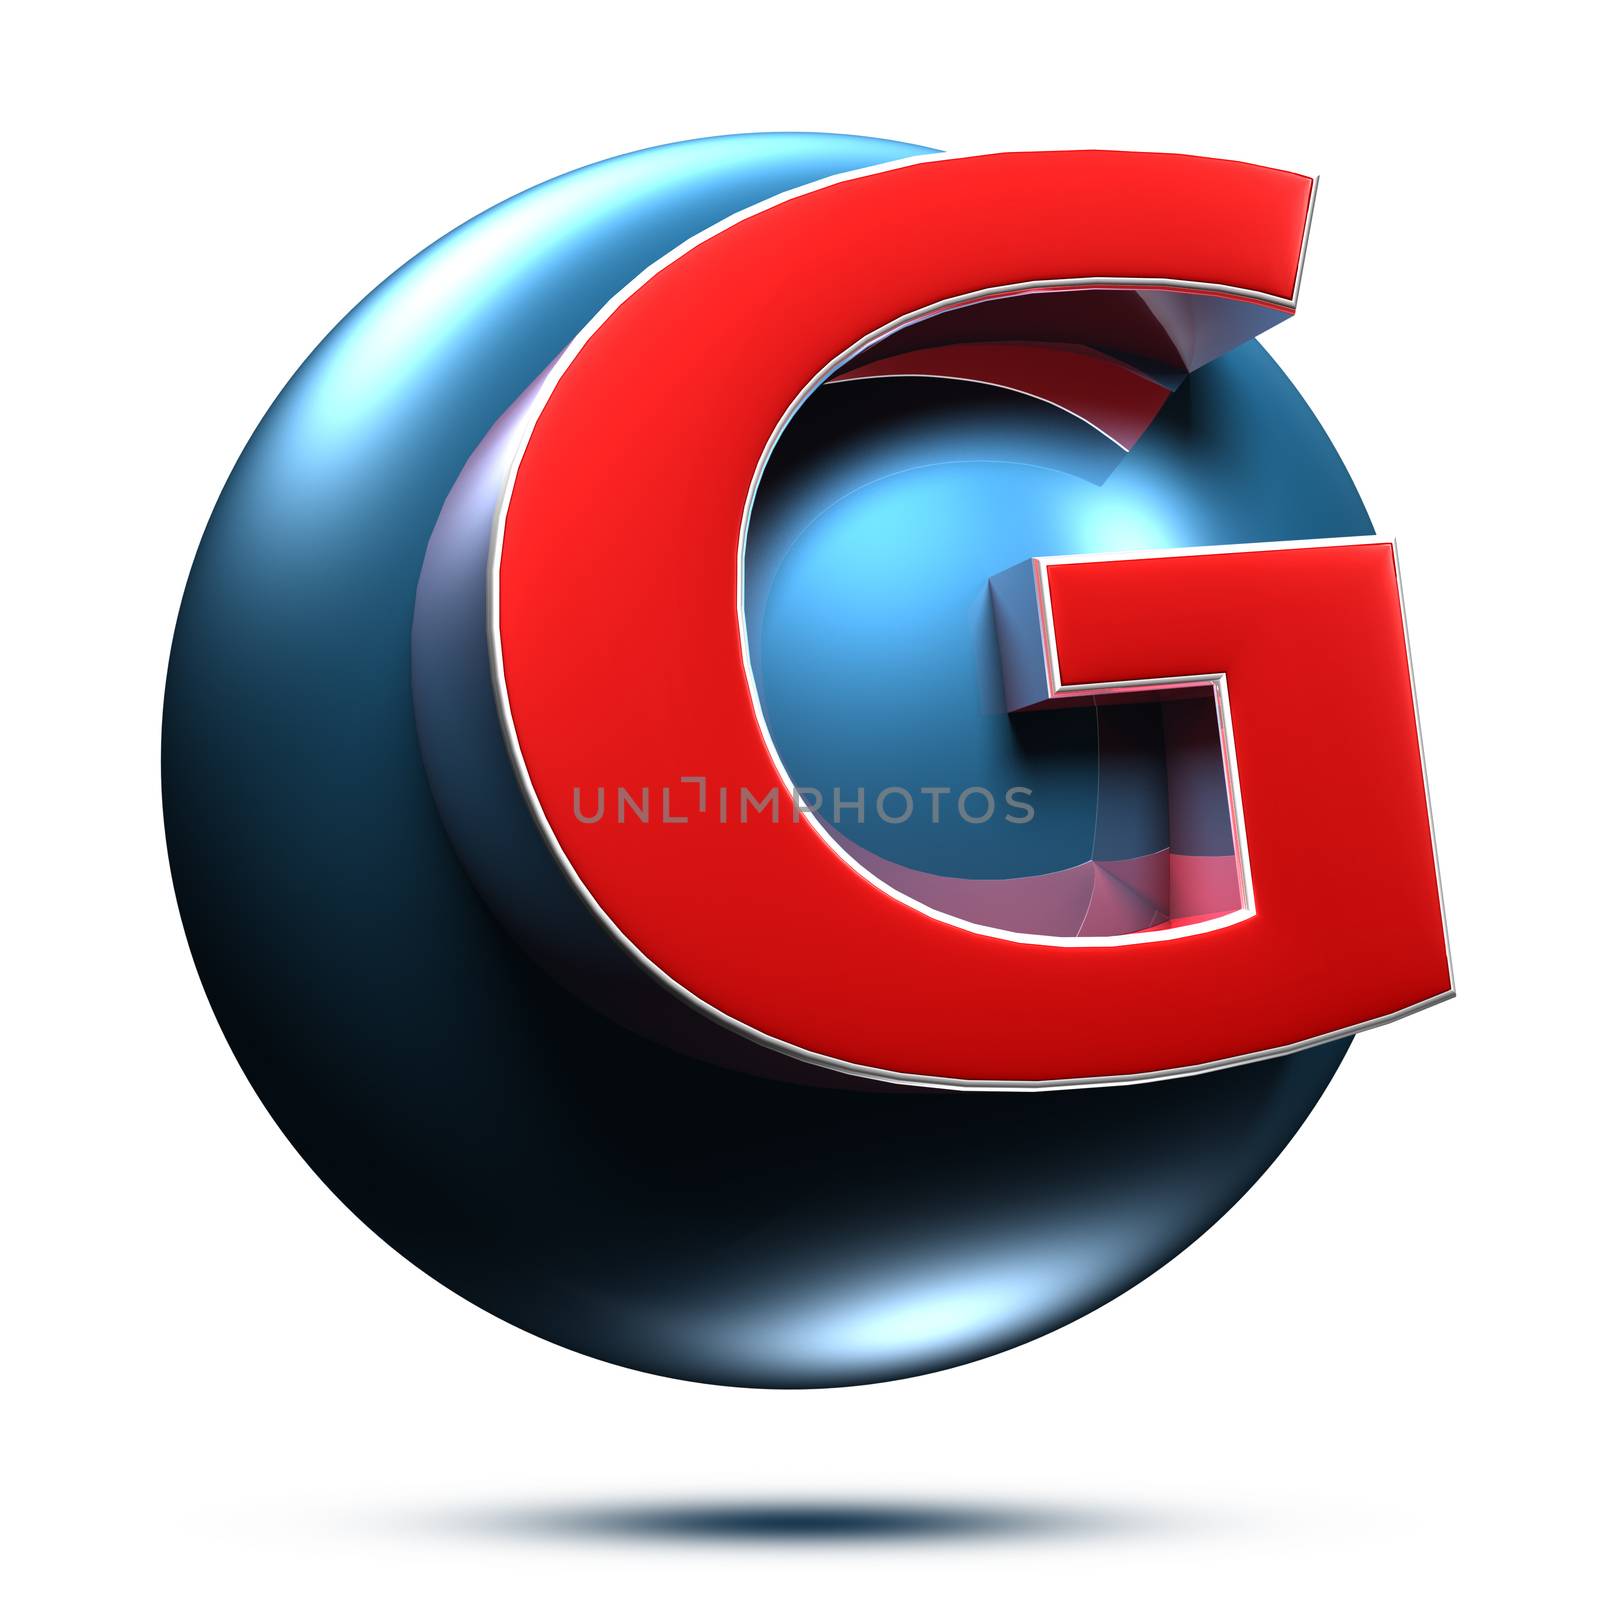 G logo isolated on white background illustration 3D rendering with clipping path.